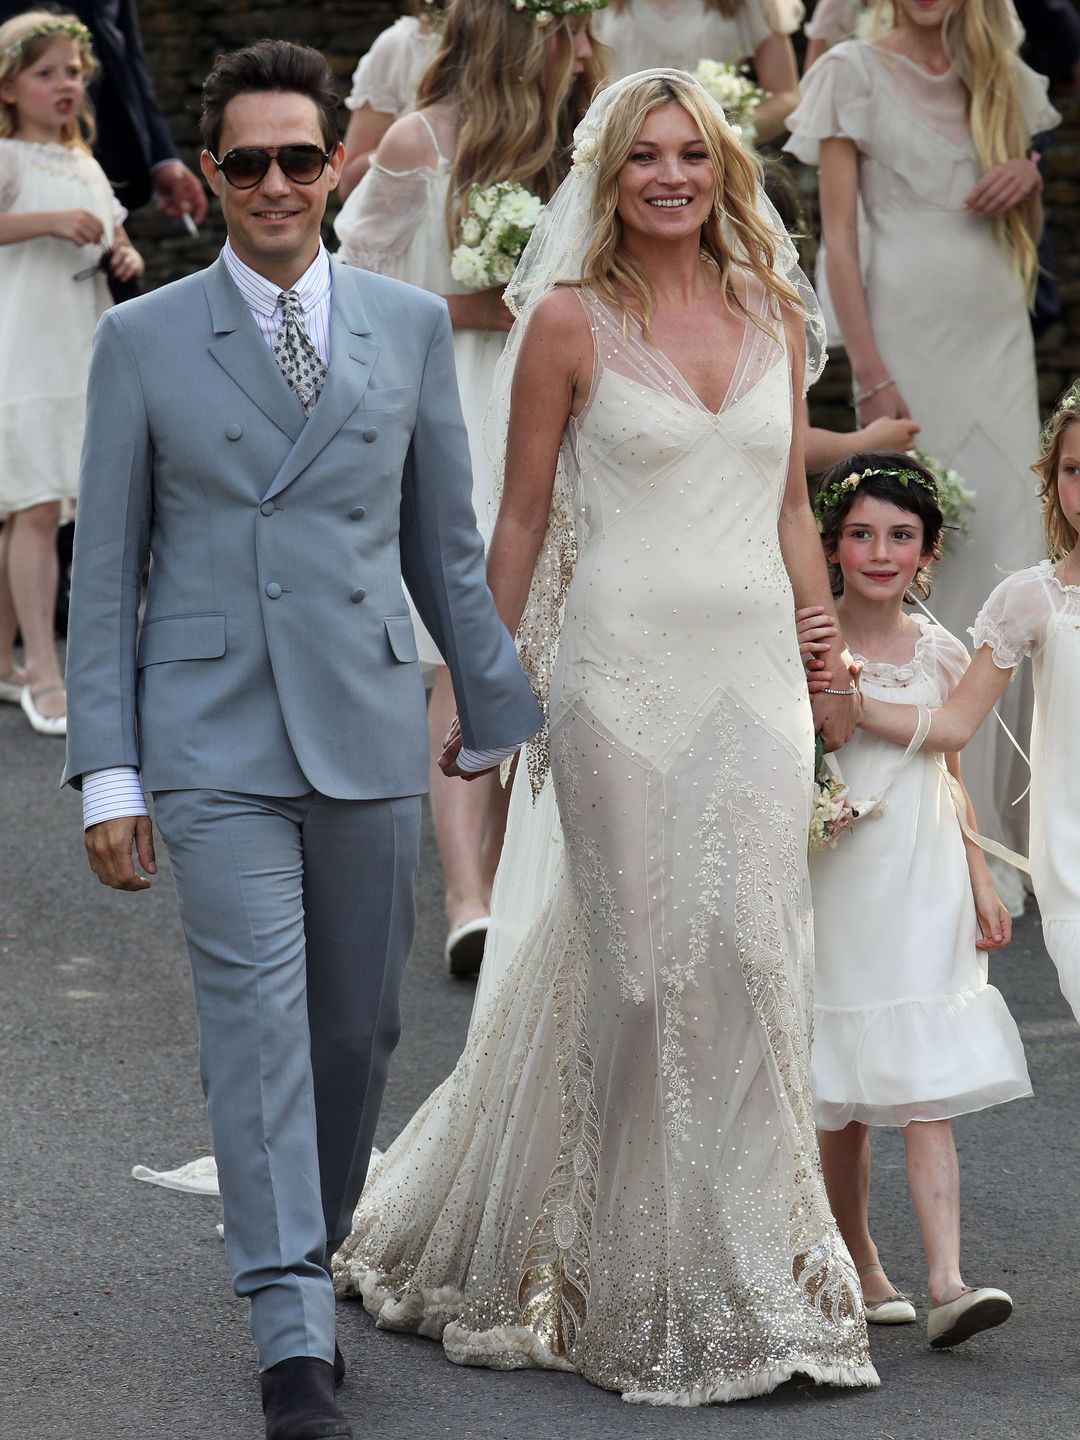 Kate Moss and Jamie Hince walk outside the church after getting married on July 1, 2011